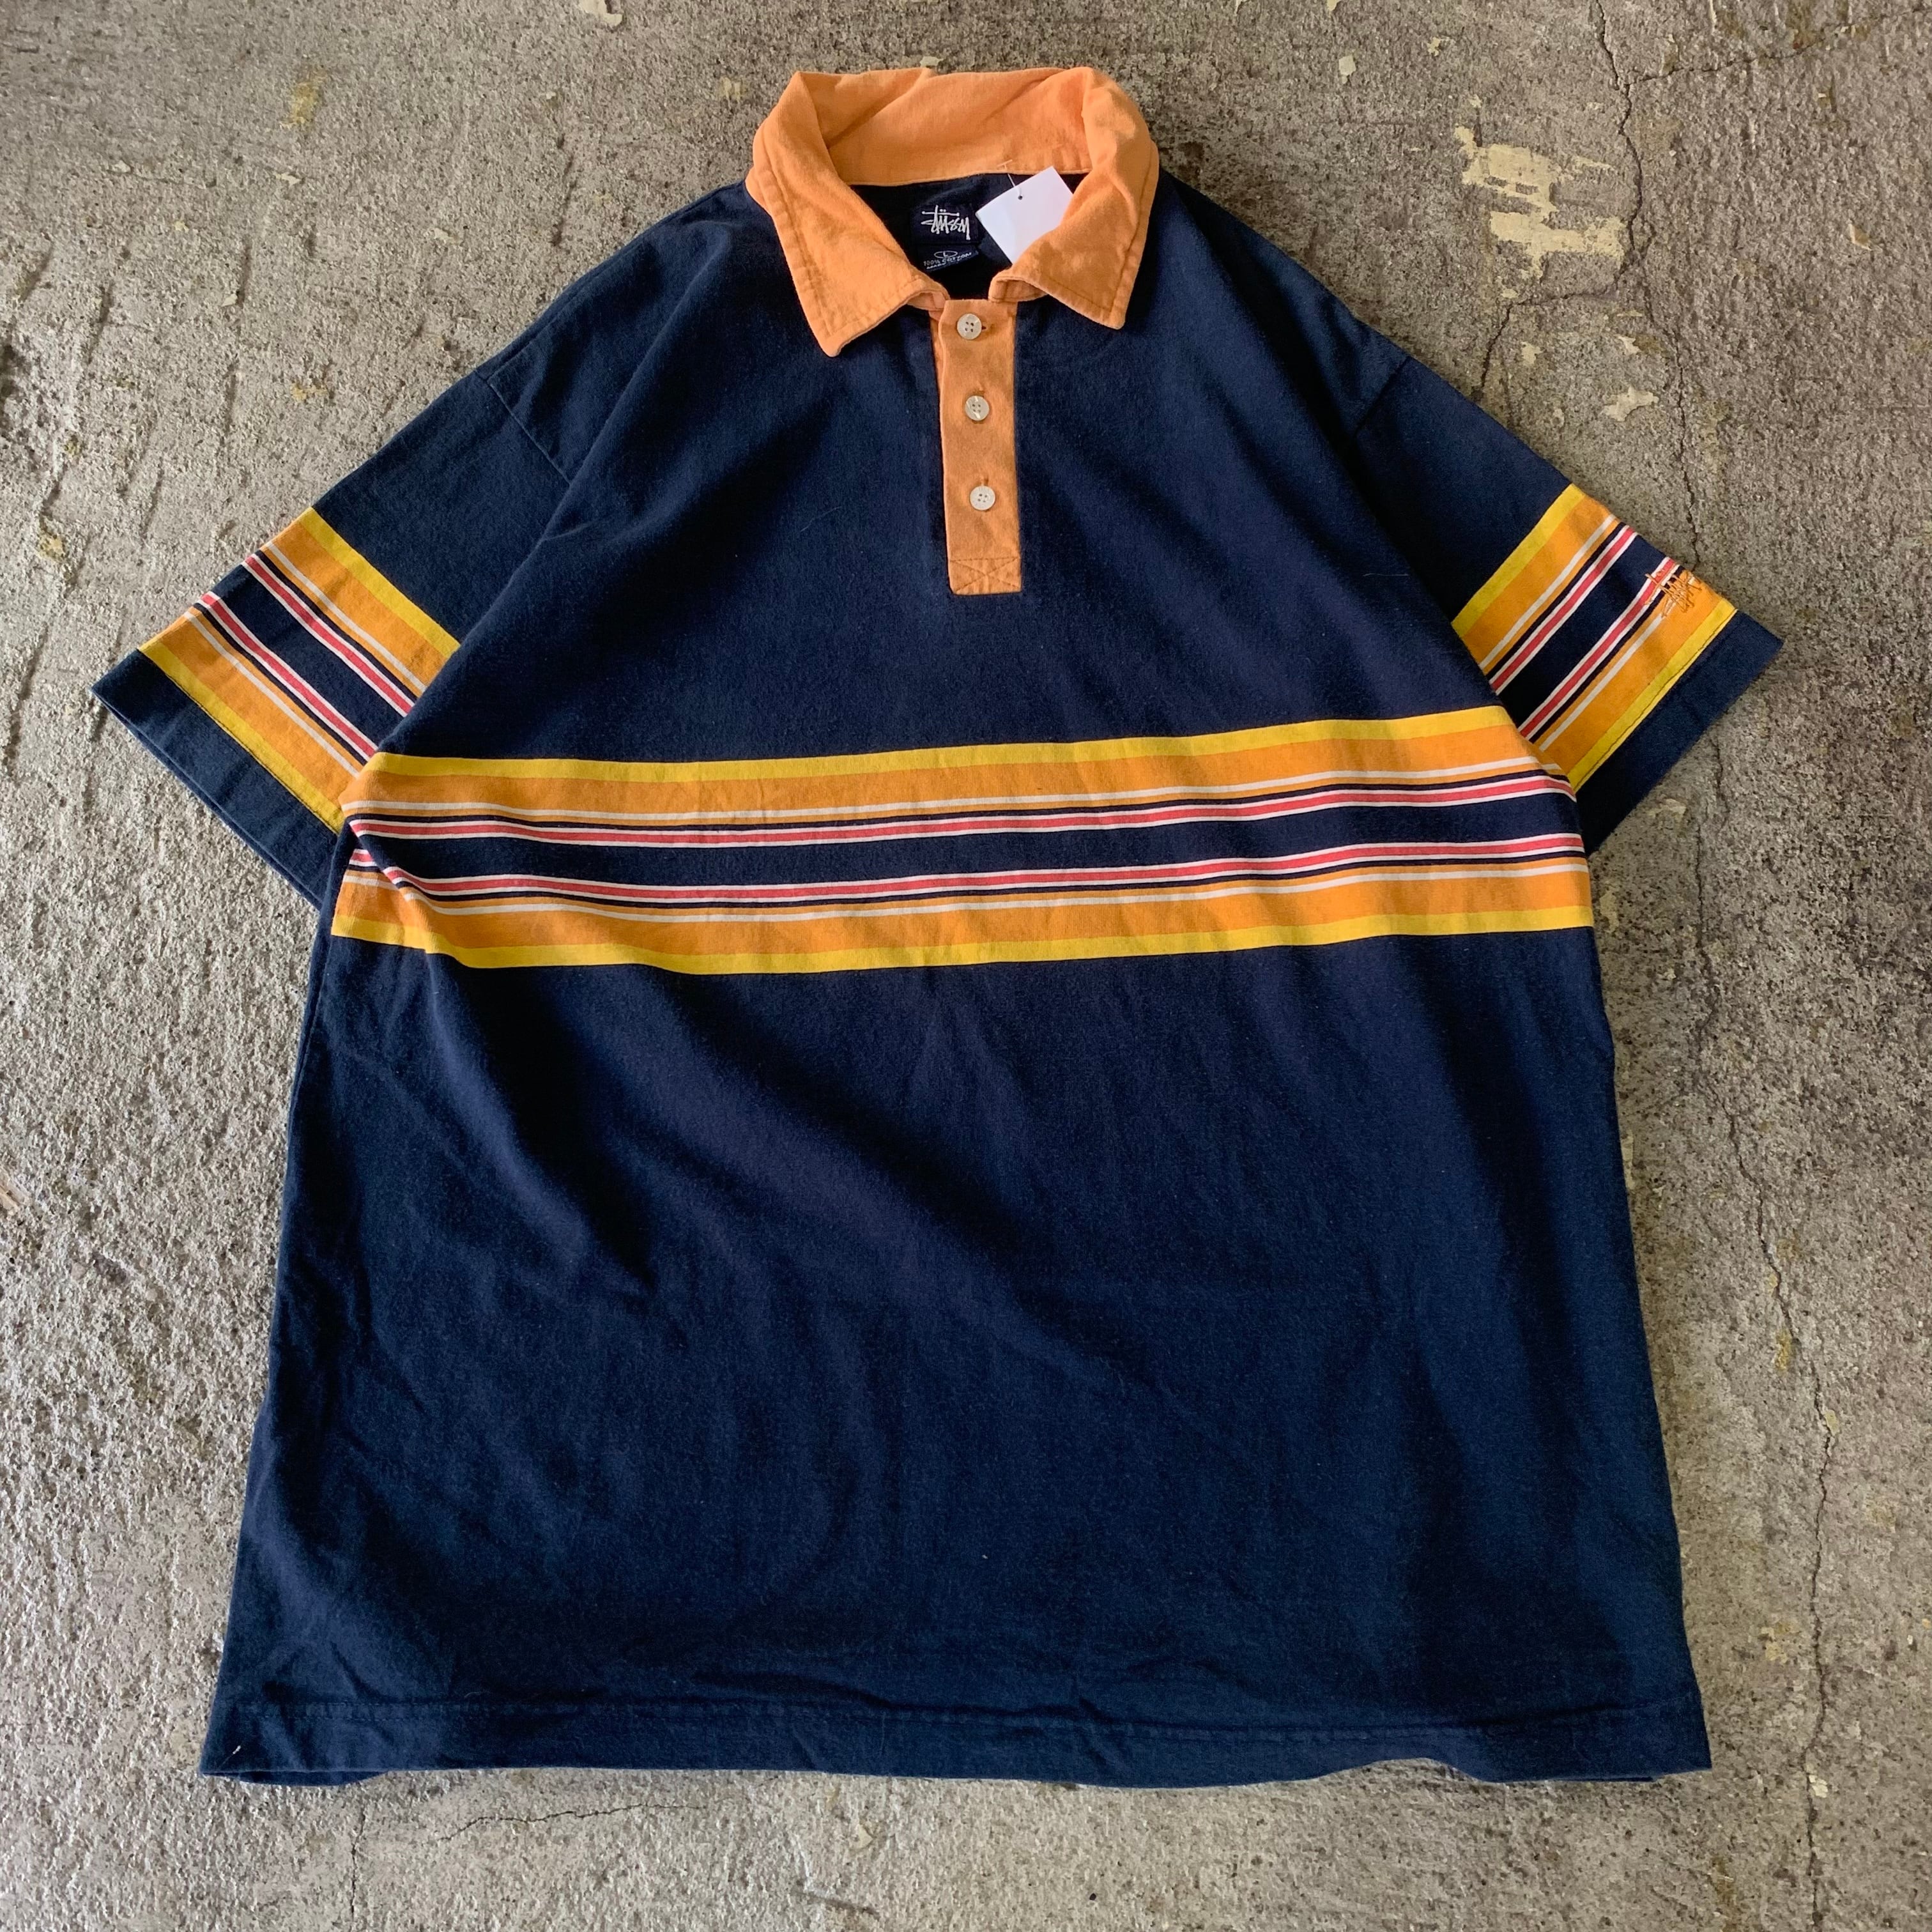 90s old stussy polo shirt | What'z up